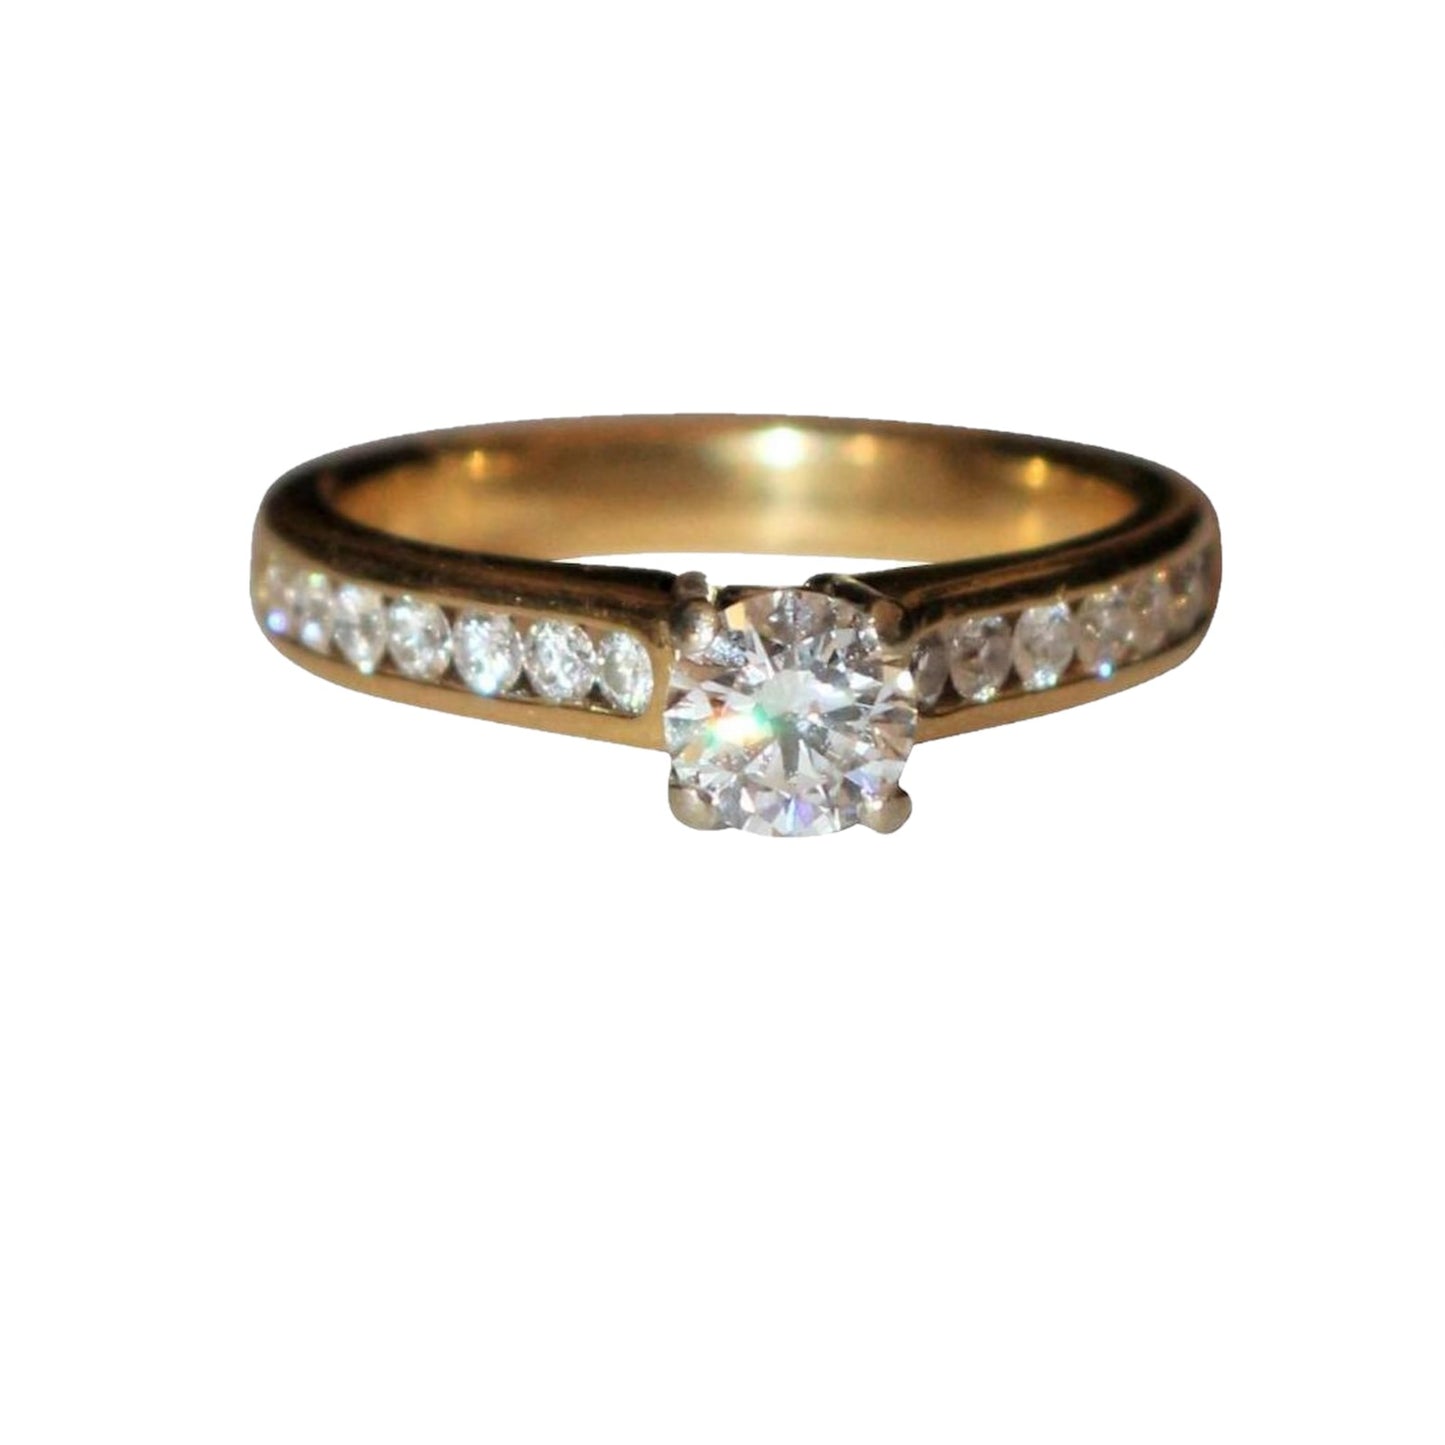 Birks brand solitaire ring